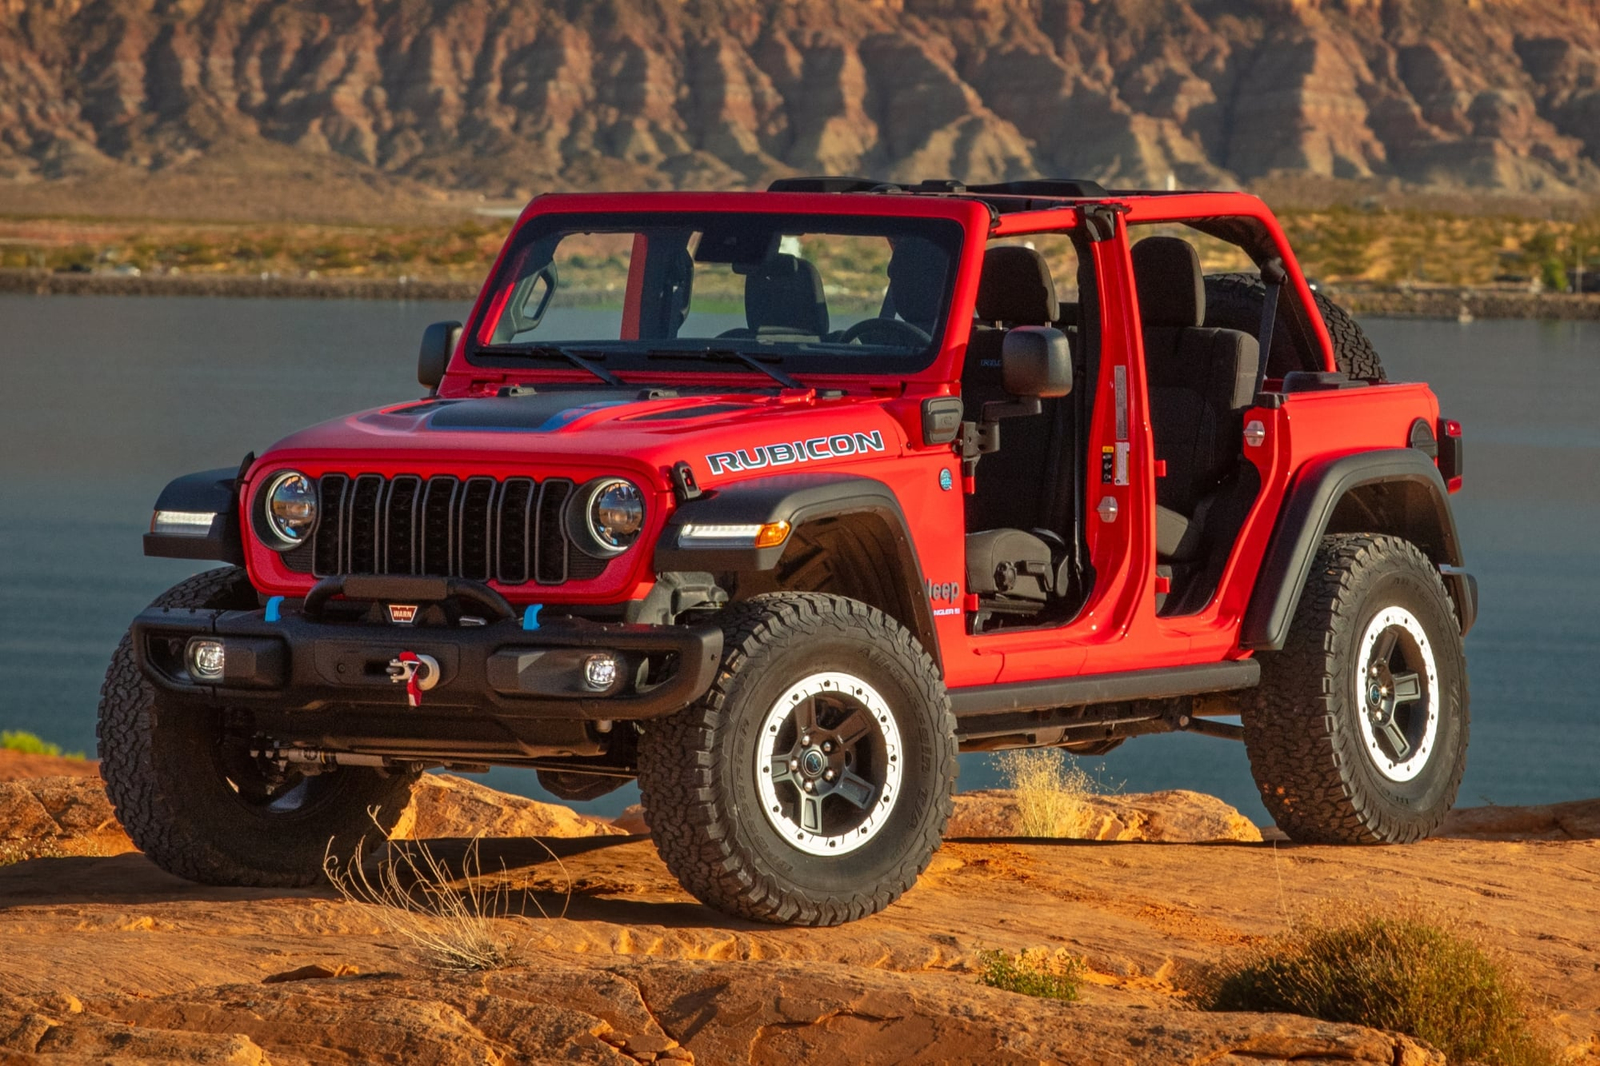 tuning, mopar announces new 2-inch lift kit for jeep wrangler and gladiator